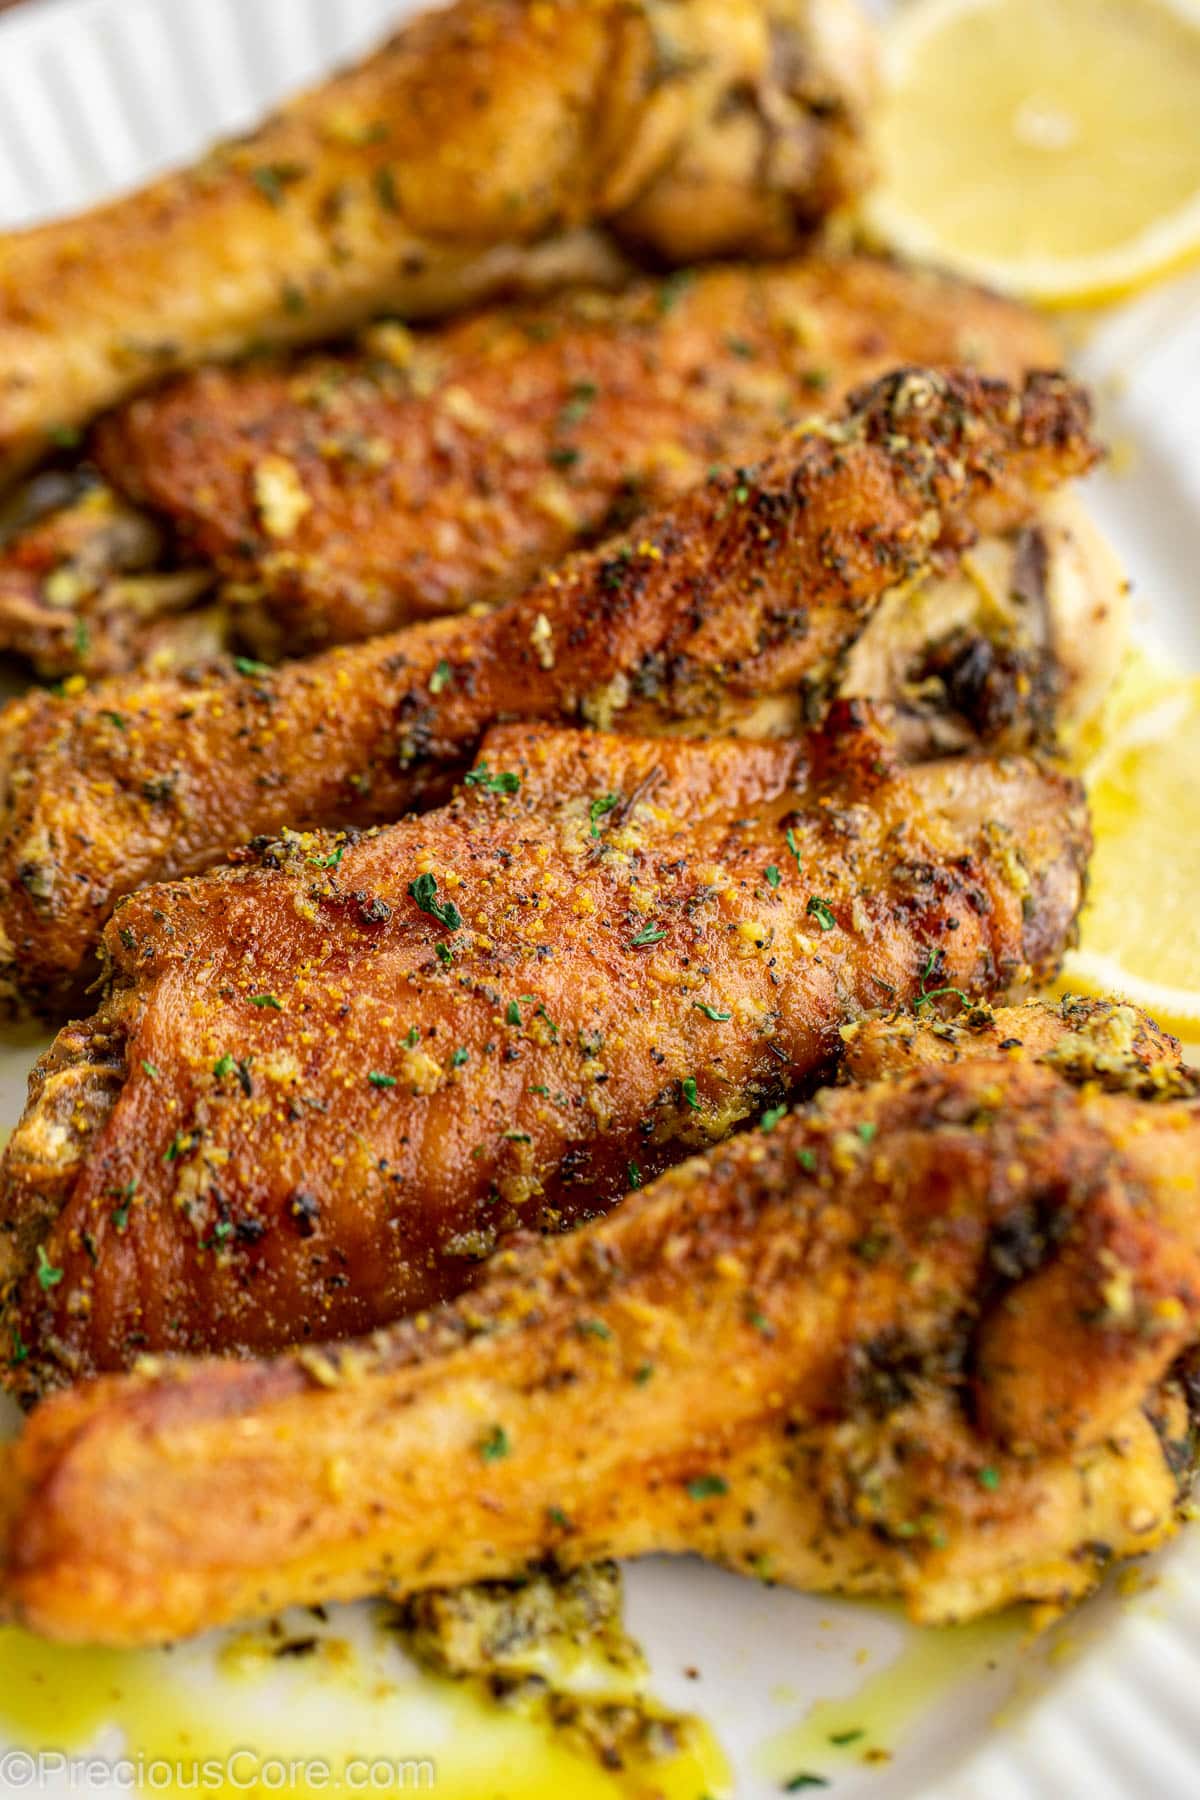 Cooked turkey wings.